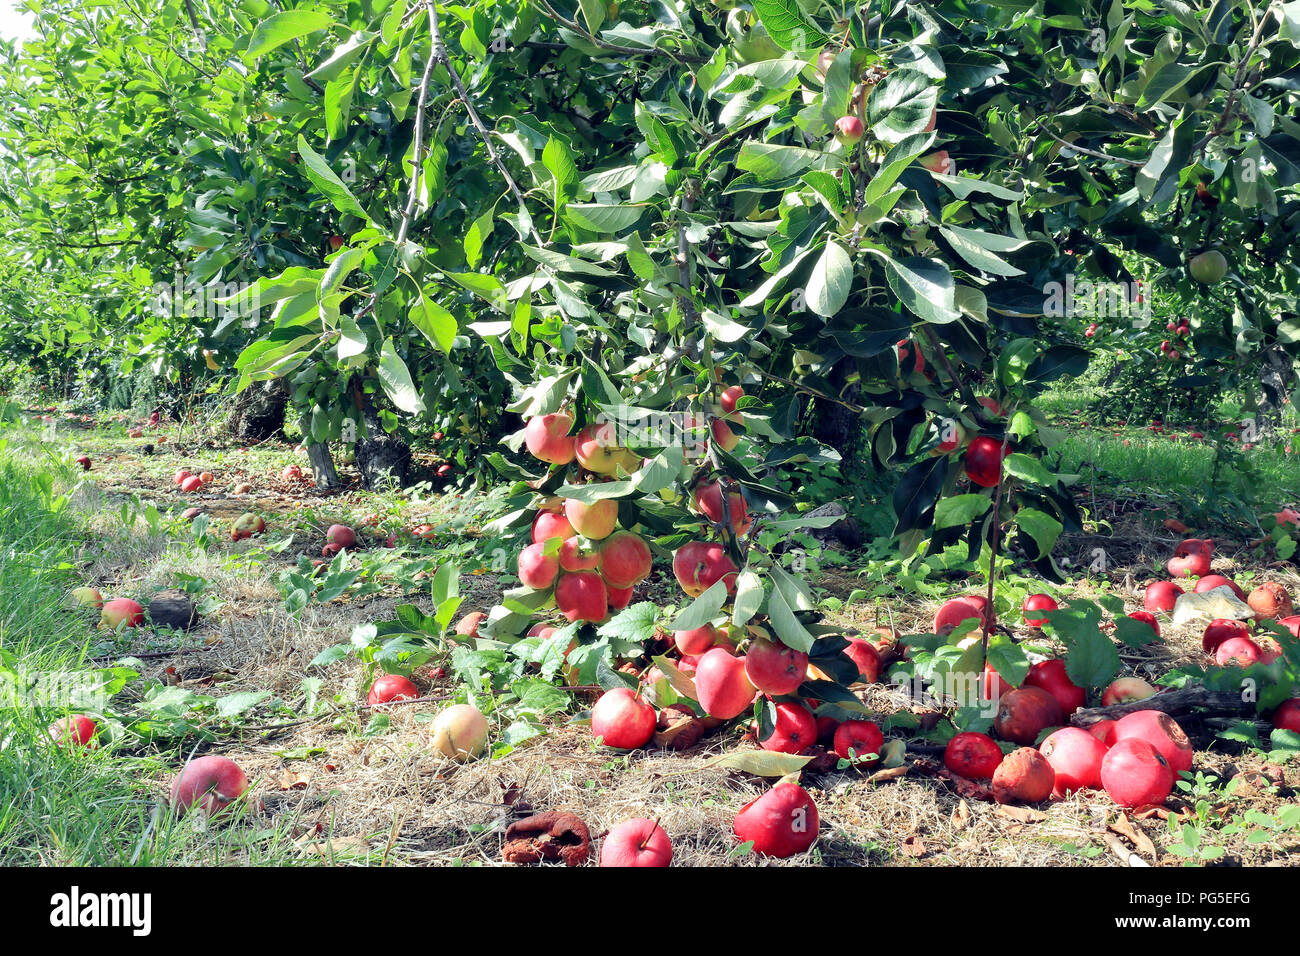 Seasonal fruit orchard with ripe organic red and yellow apples on branches and rotten on the ground, in an English rural countryside . Stock Photo